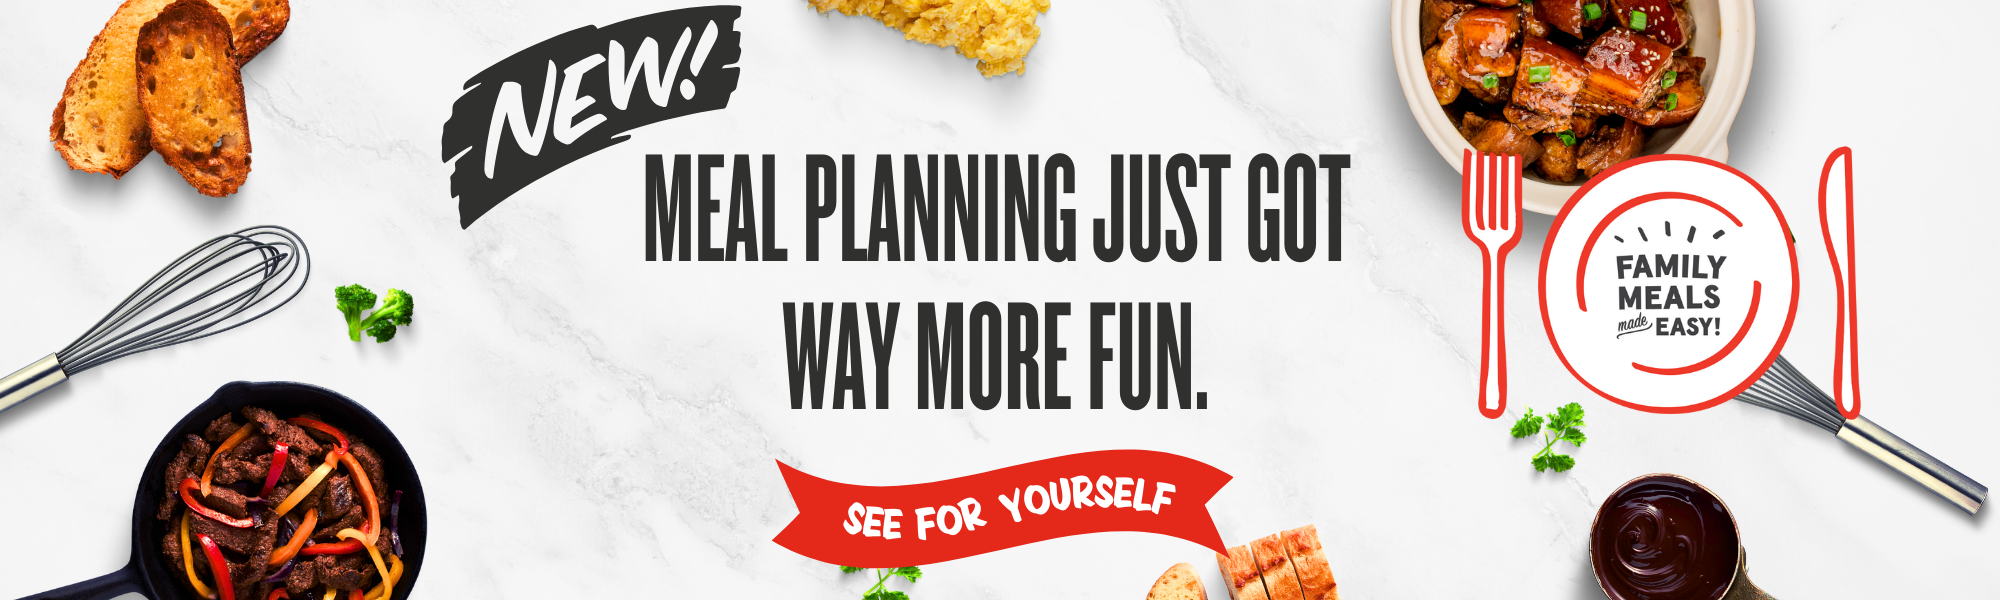 Meal Planning Just Got Way More Fun